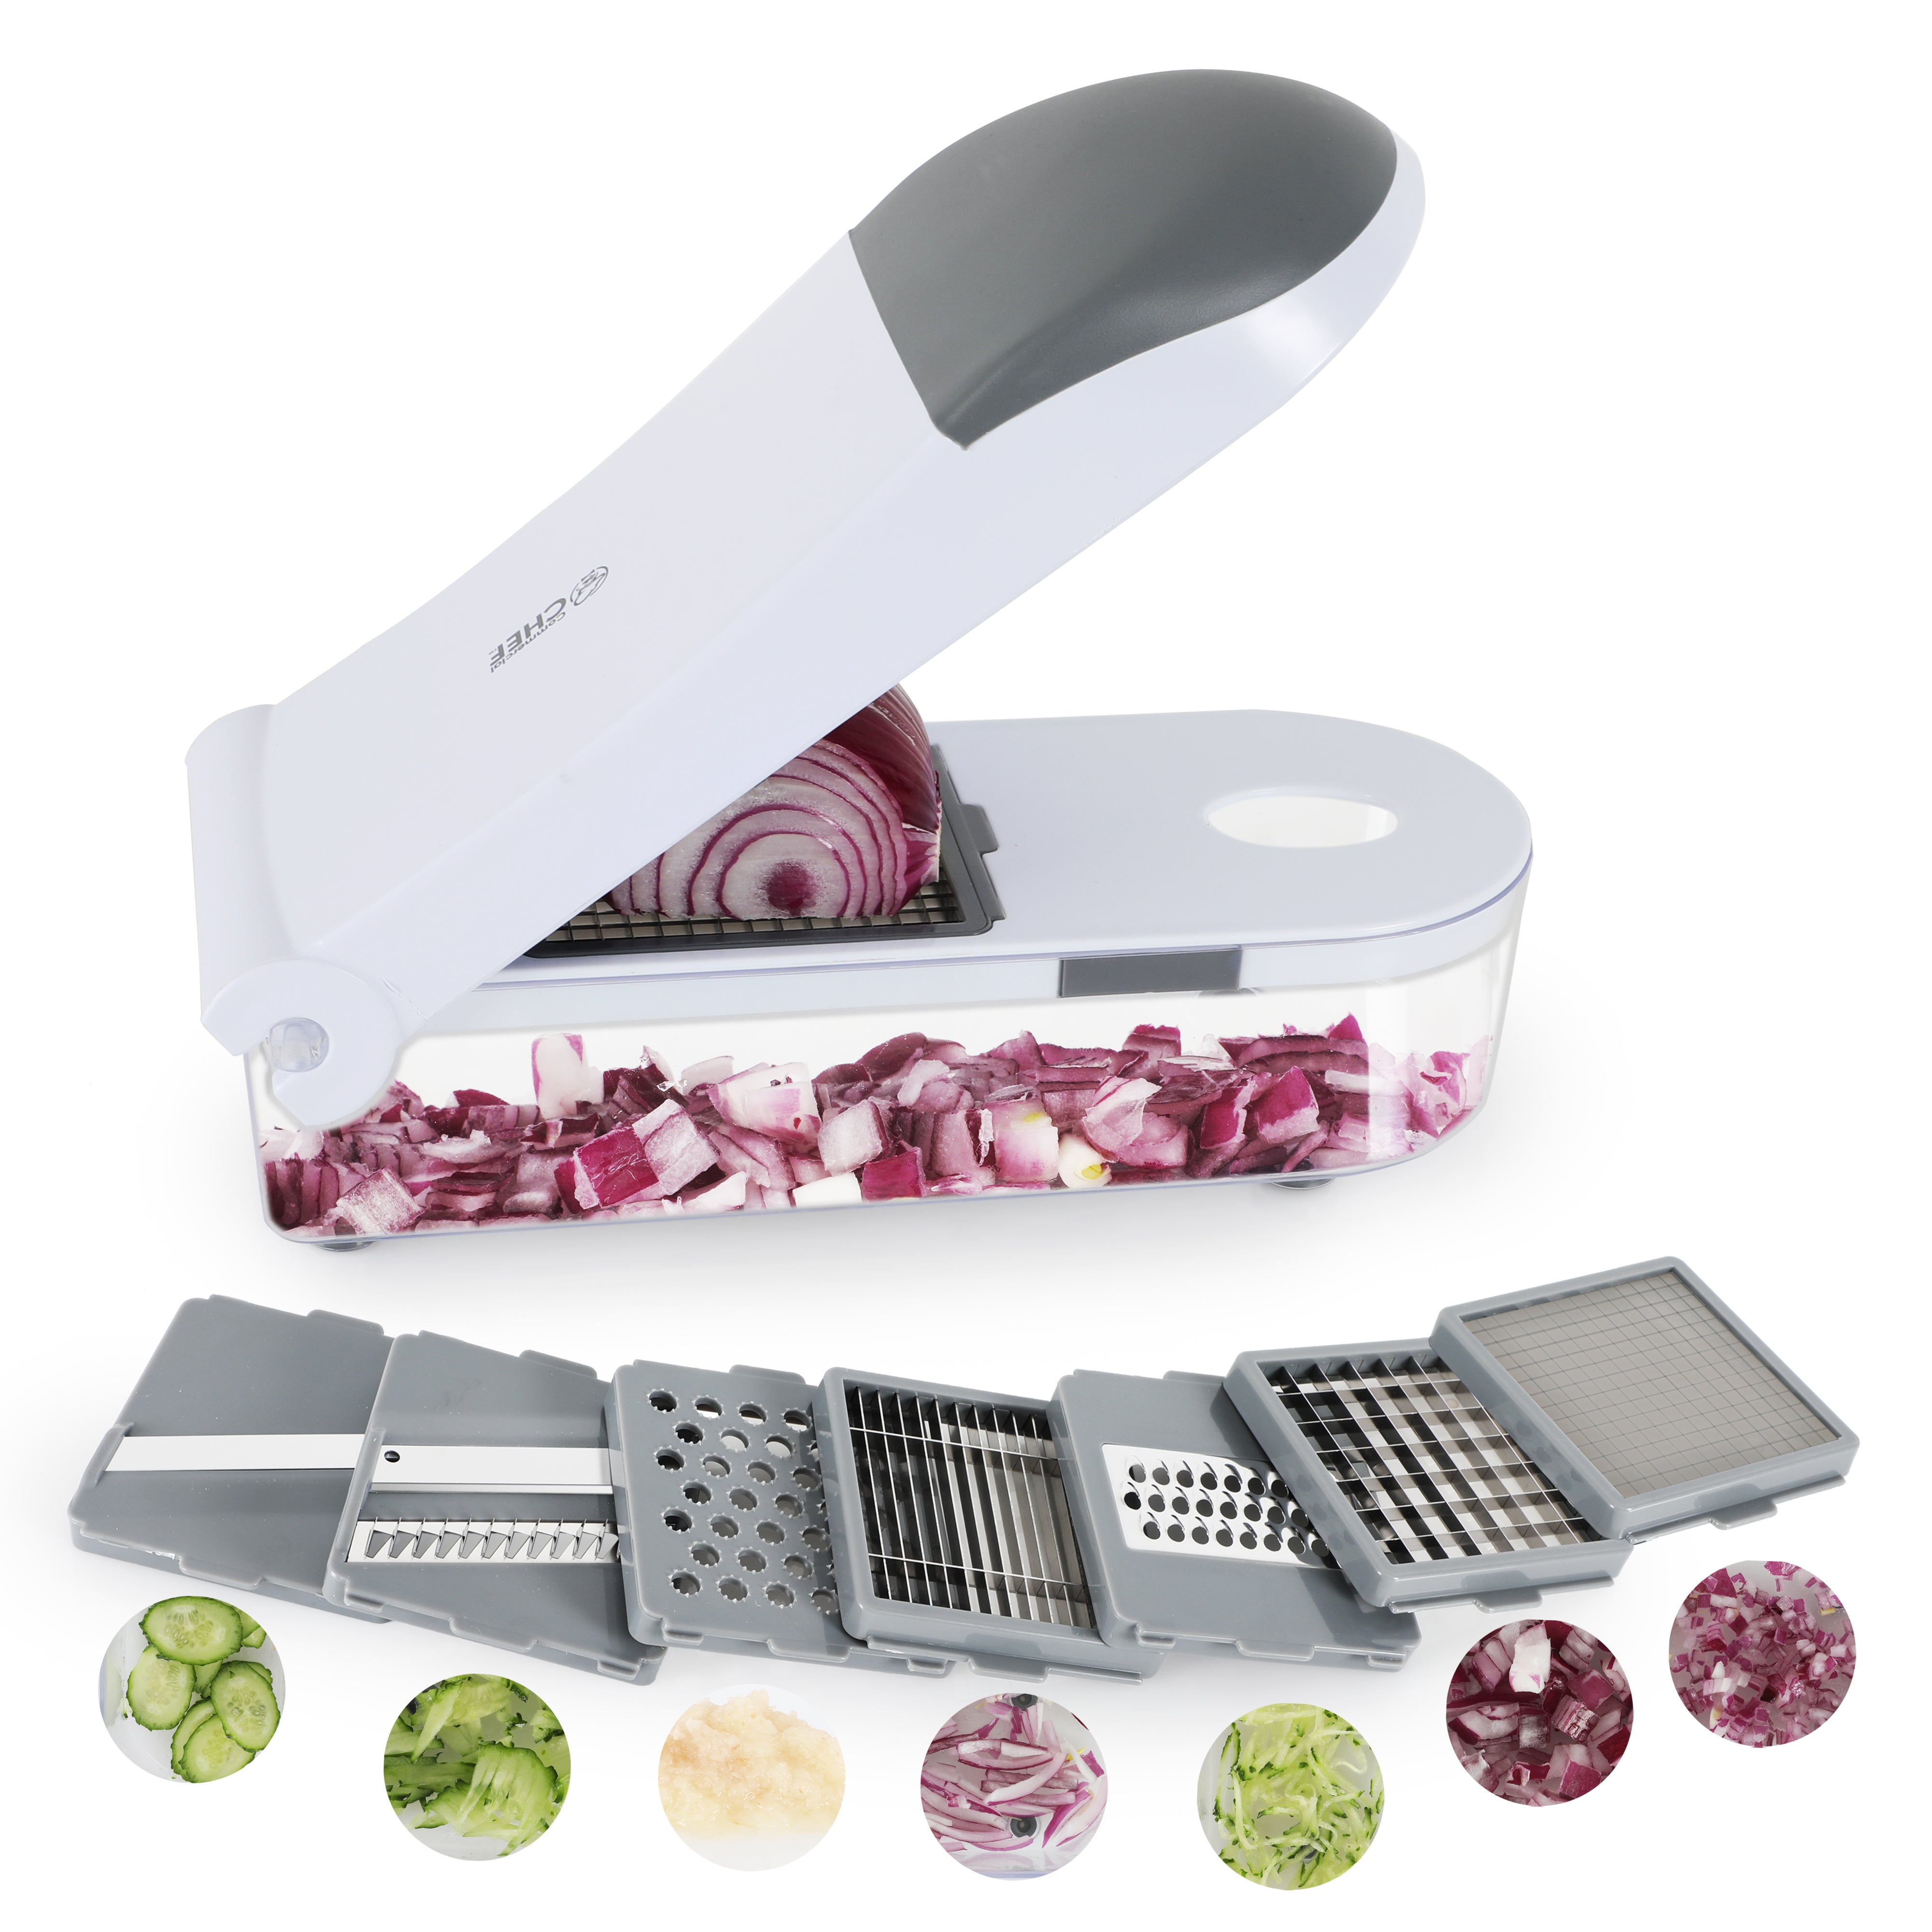 Commercial Chef Multi Cutter & Grater - 4-in-1 Multi-Use Slicer Dicer And Chopper With Interchangeable Blades, Food Holder, Use For Fruits, Nuts and Vegetables